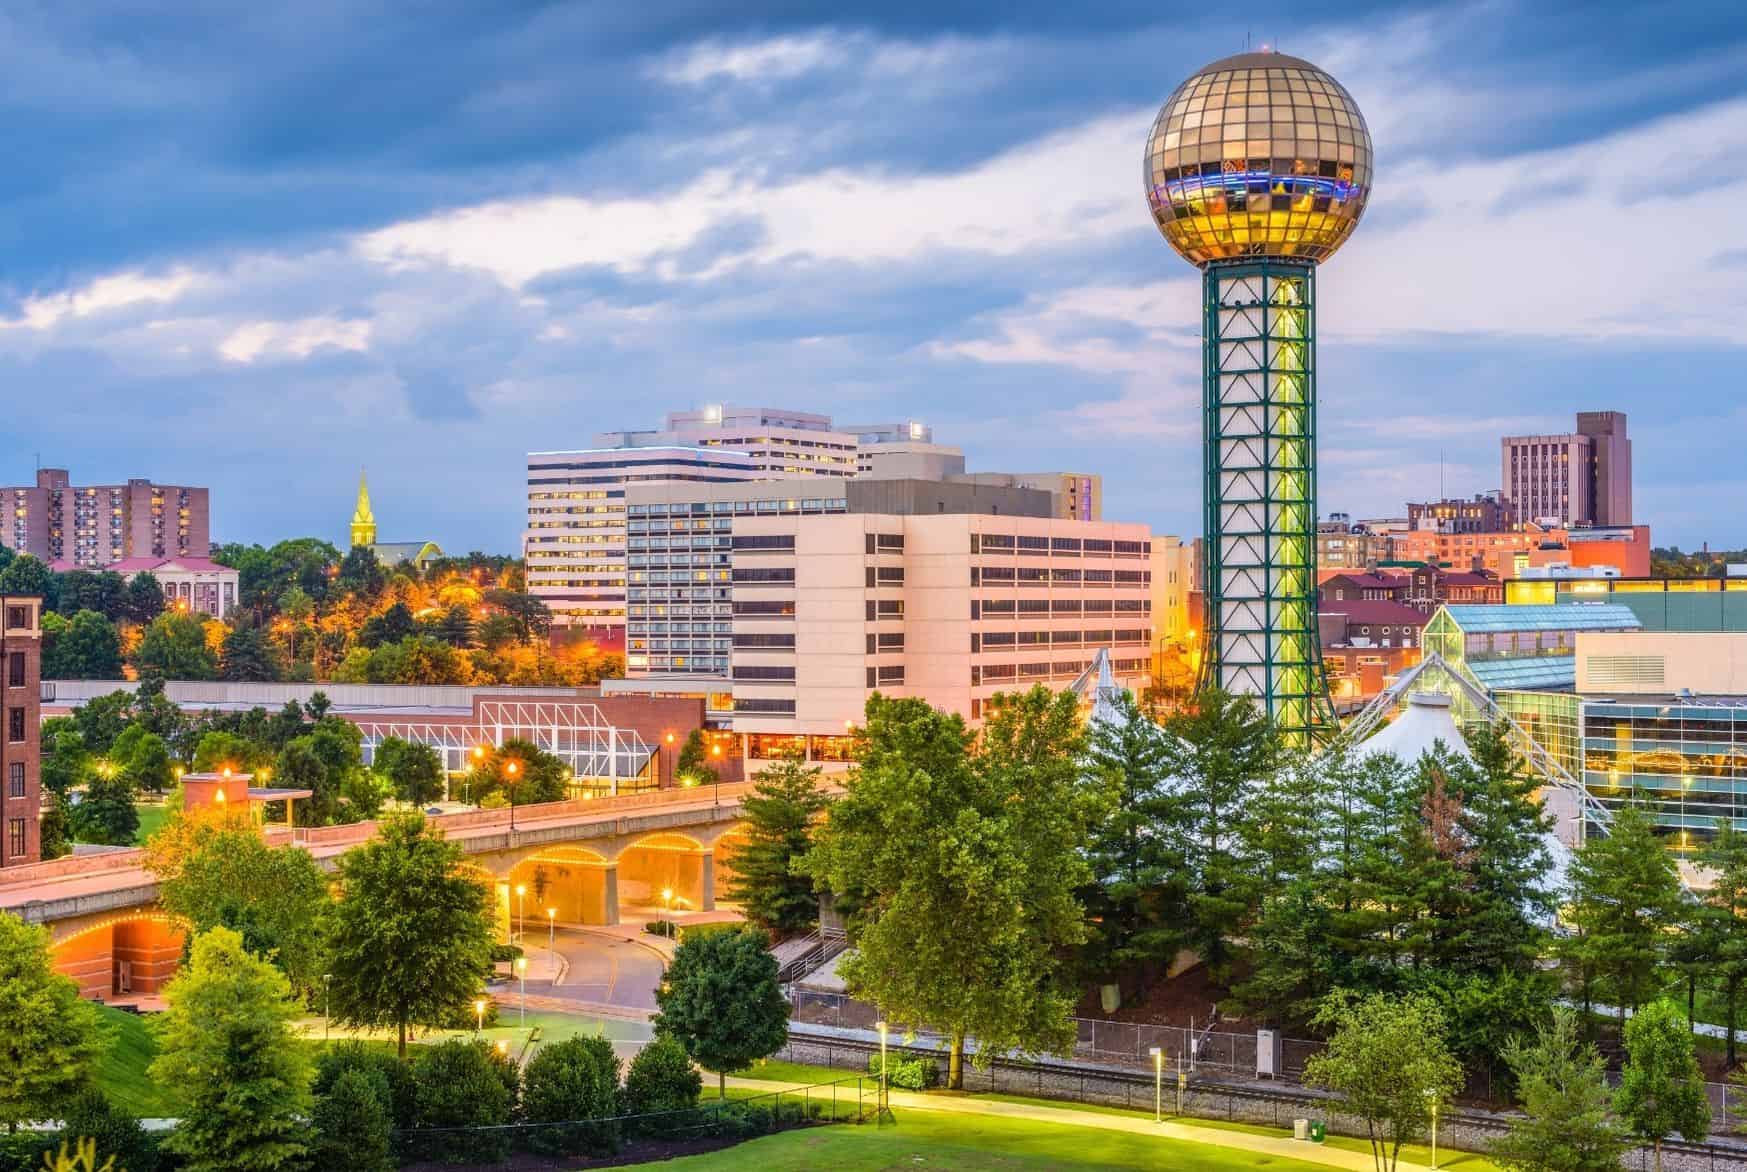 Cinders Travels The 48 Best Things to do in Knoxville, Tennessee in 2021